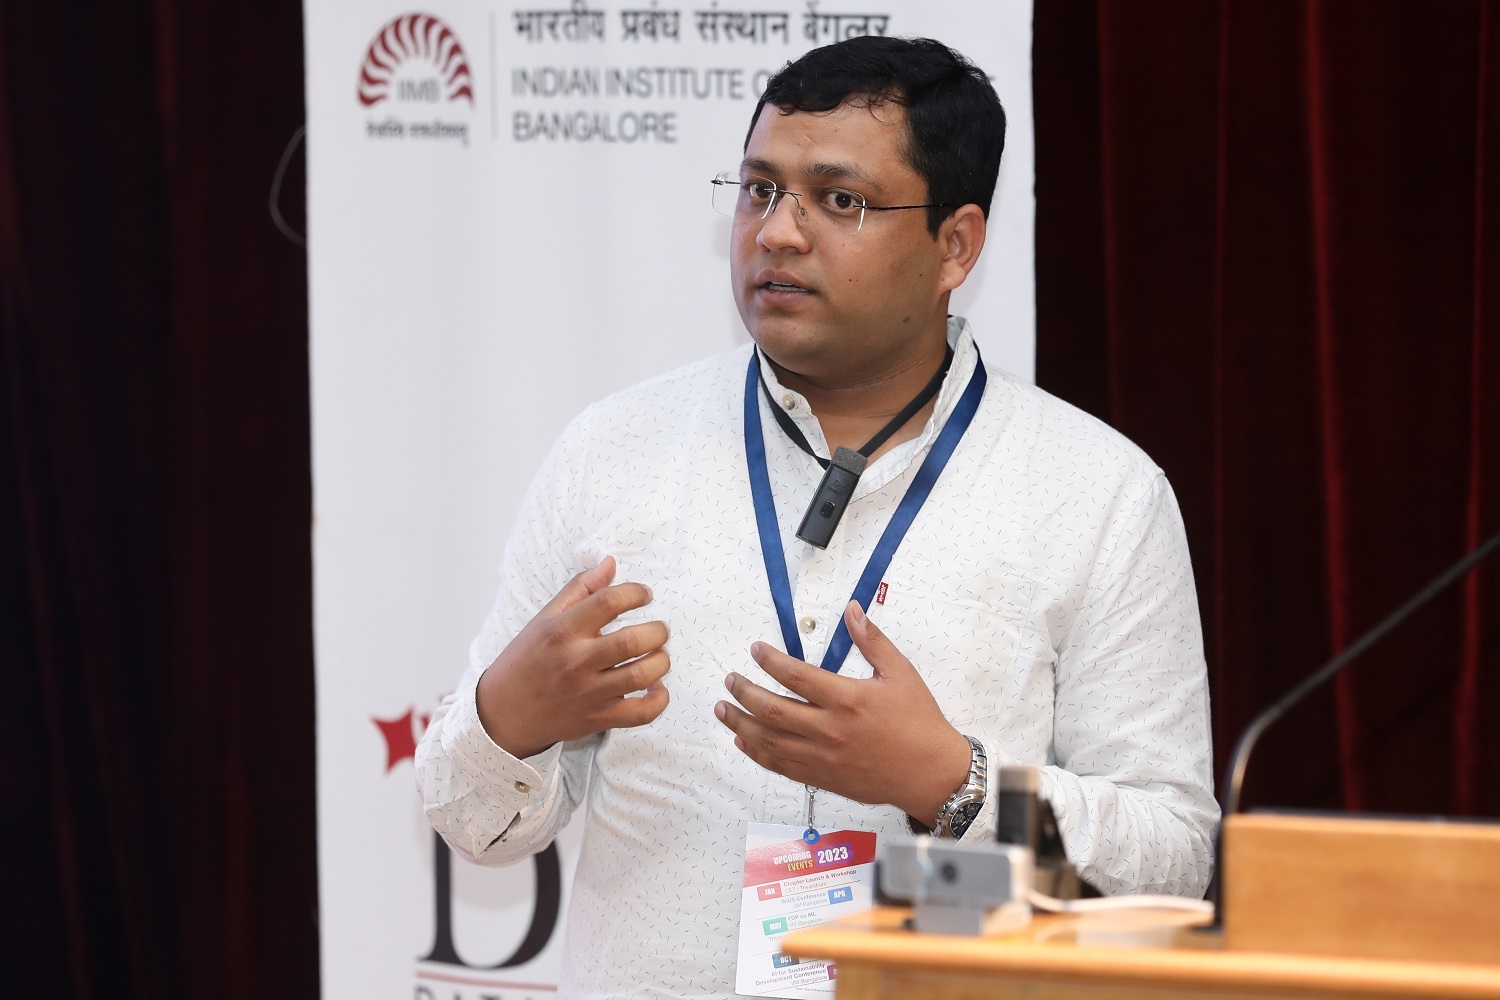 Mr. Hrishikesh Vidyashar Ganu, Sr. Director and Head, Data Science, Myntra, speaks on ‘Large Scale Recommender Systems in Fashion E-Commerce’, at the conference.